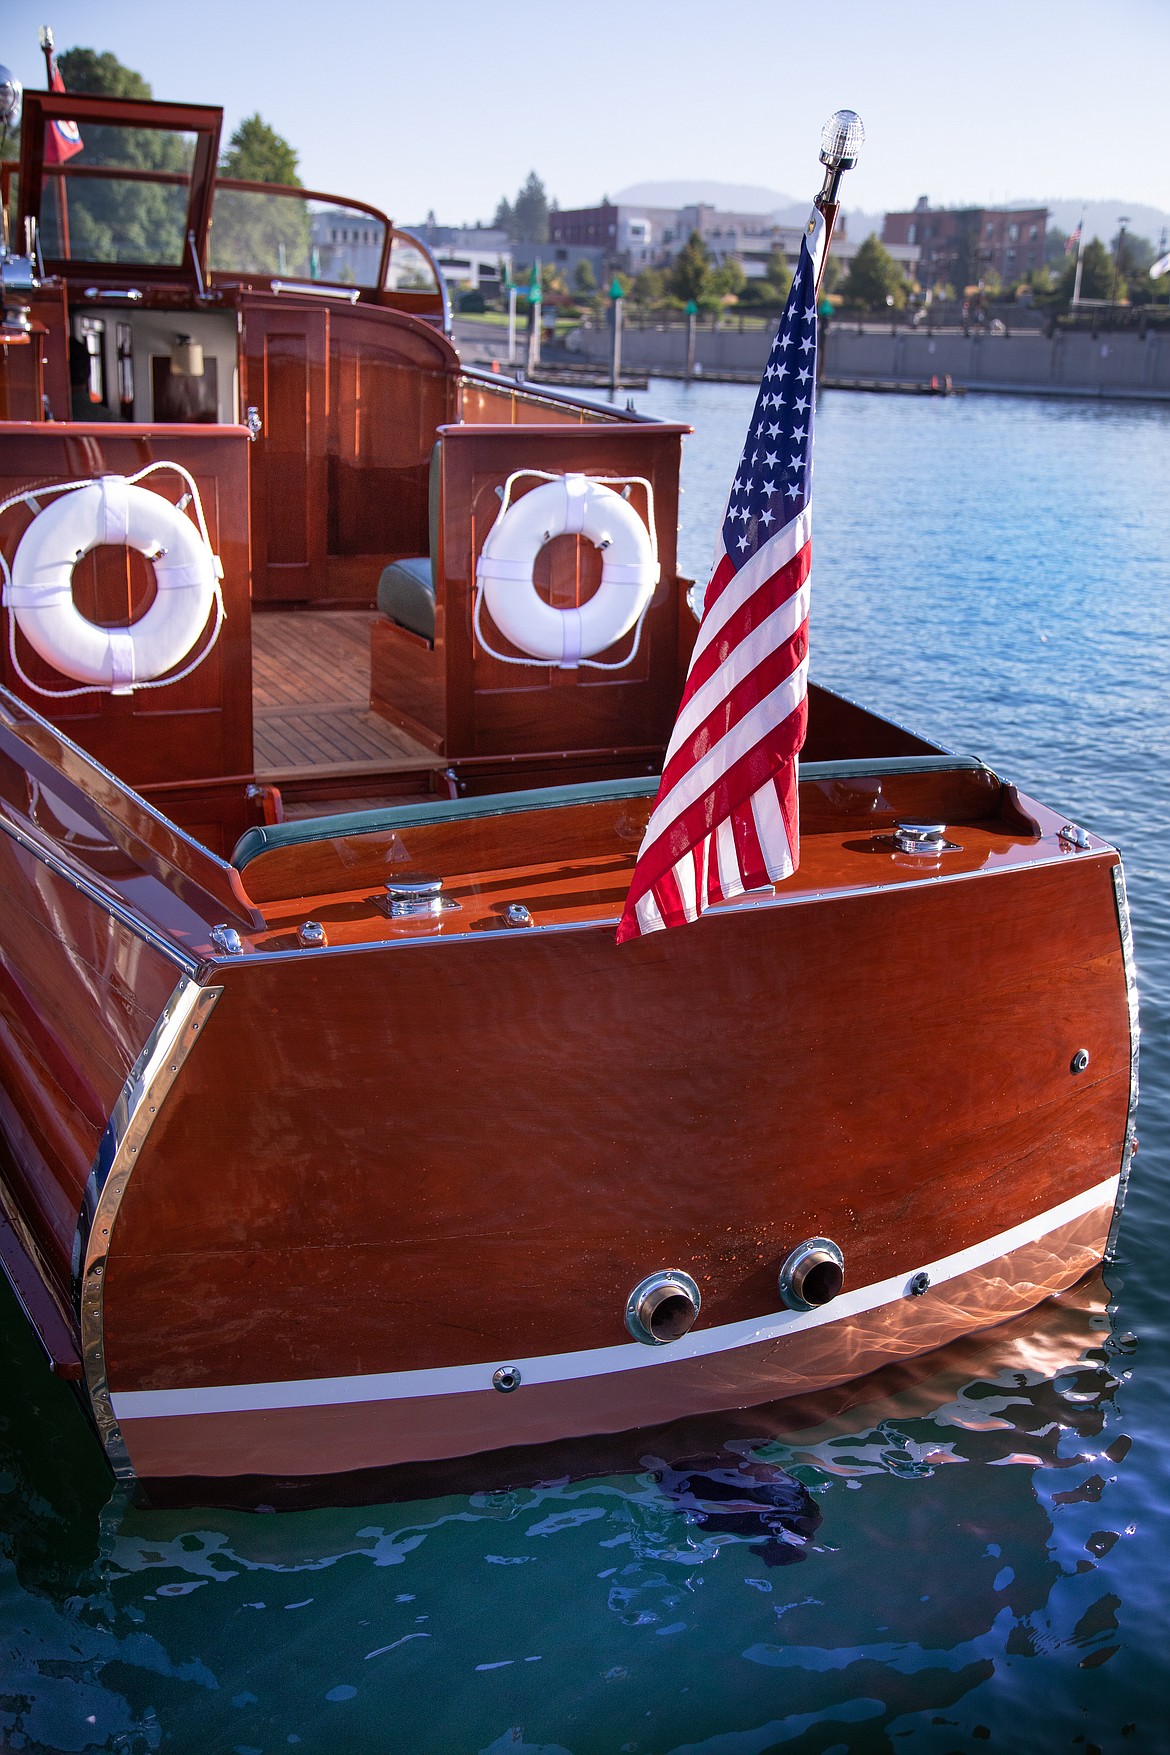 "Willow," a 1929 Chris-Craft Commuter Cruiser, was recently restored by Coeur Custom. She has won prestigious awards at five Pacific Northwest wood boat shows.